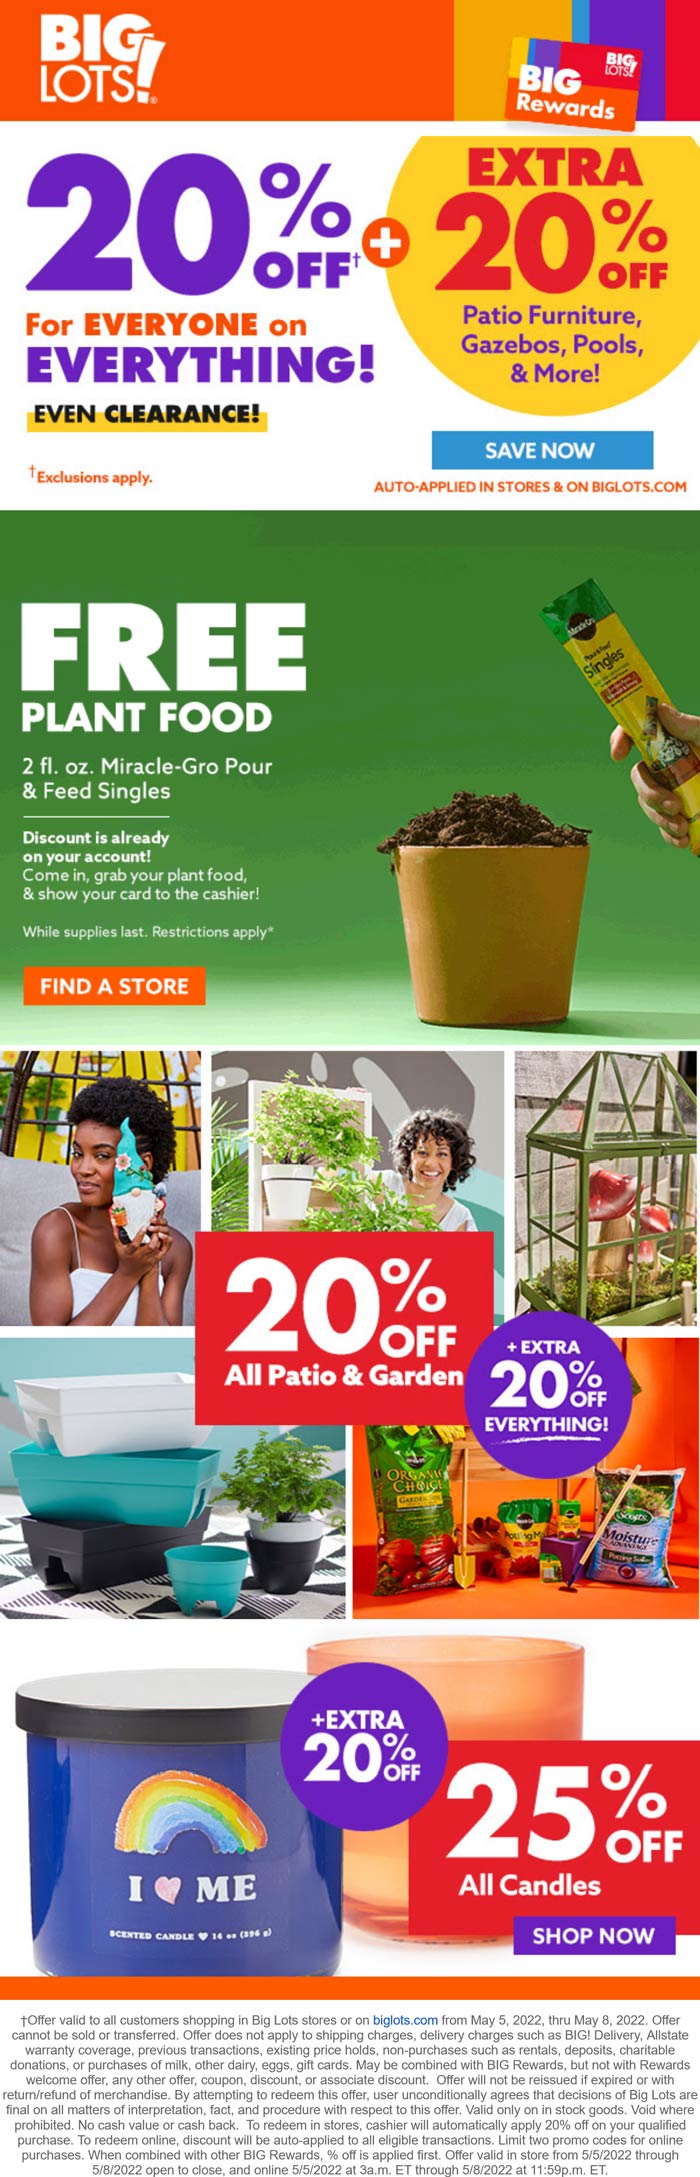 Big Lots stores Coupon  20% off everything + free miracle gro at Big Lots, ditto online #biglots 